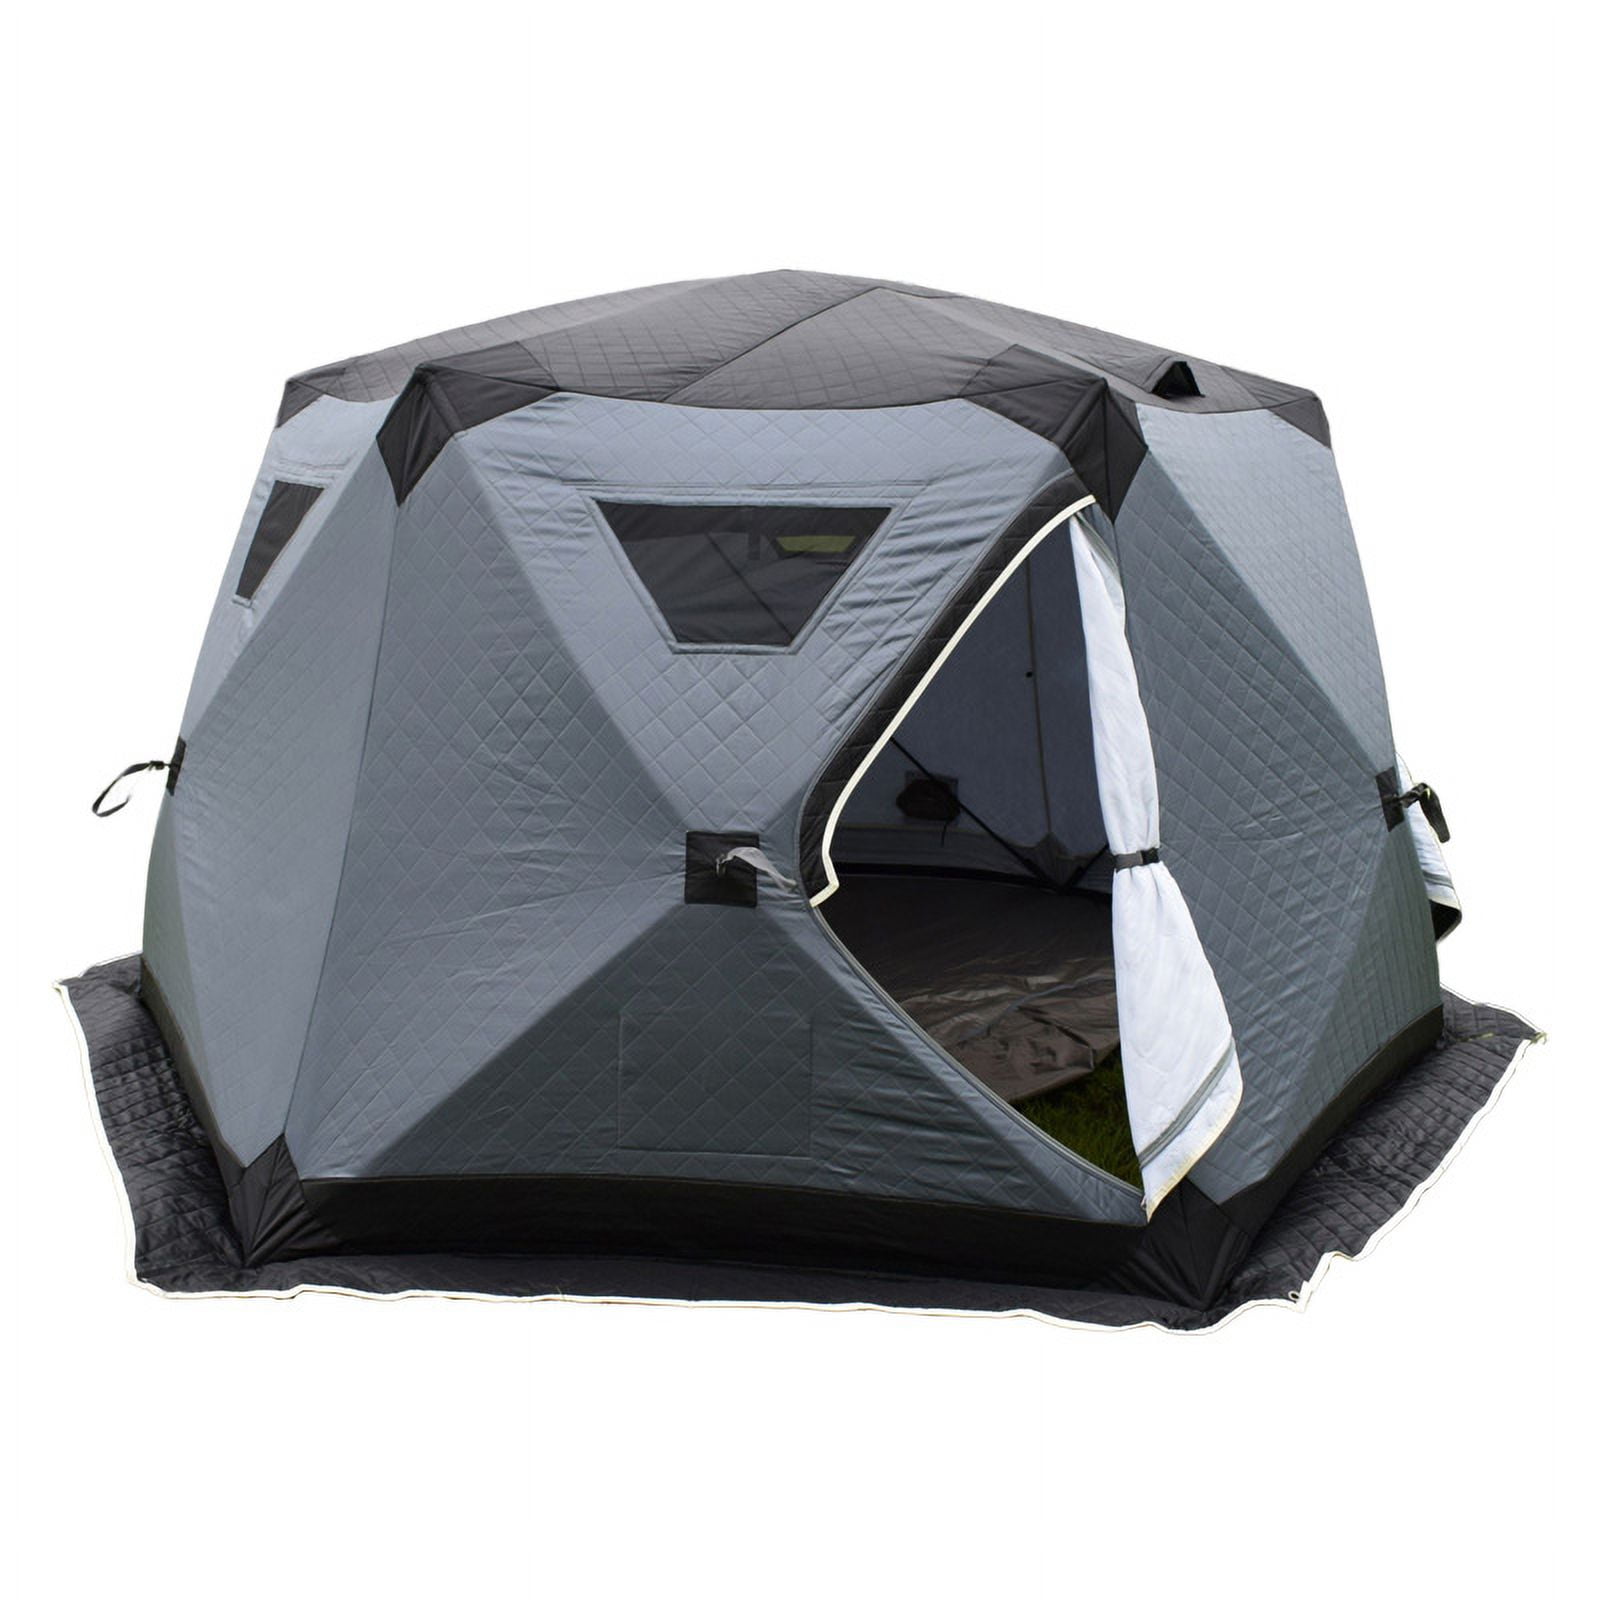 EZ Lite Fully Insulated Ice Fishing Tent, Sleeps 4-5 persons 10.8